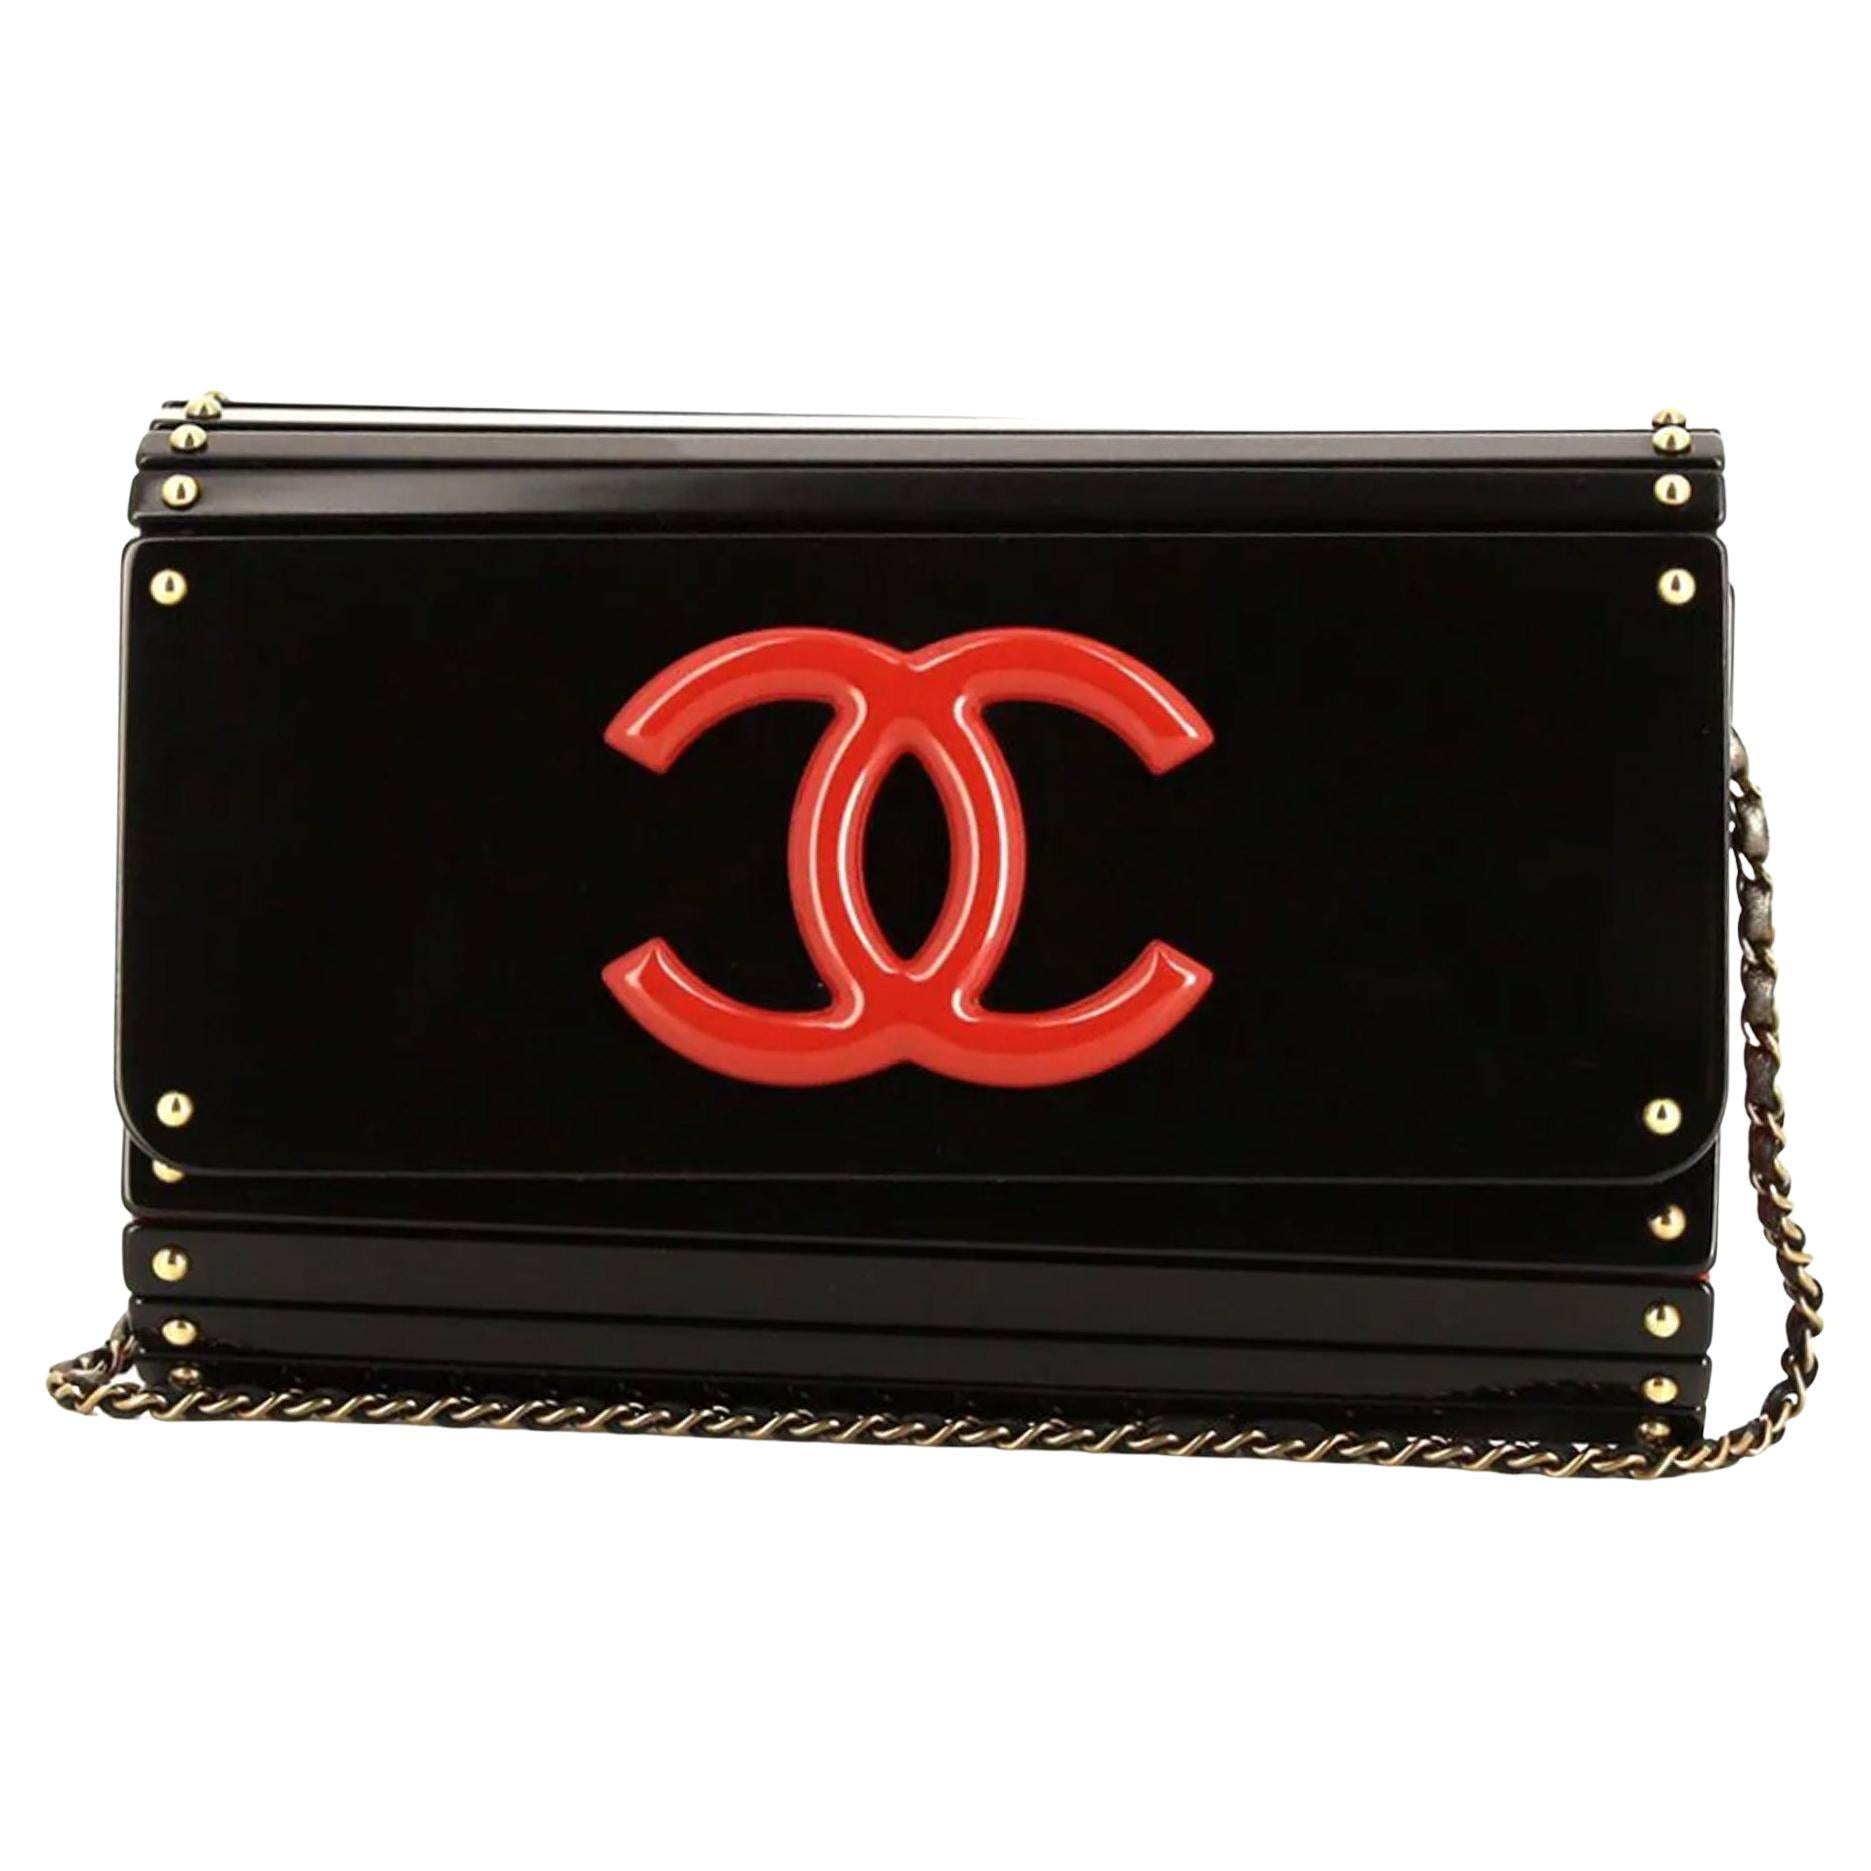 Chanel Vintage Red & Black Layered CC Shoulder Bag

circa 2009
black/red
leather
gold-tone hardware
signature interlocking CC logo
stud embellishment
foldover top
leather and chain bracelet

Made in Italy